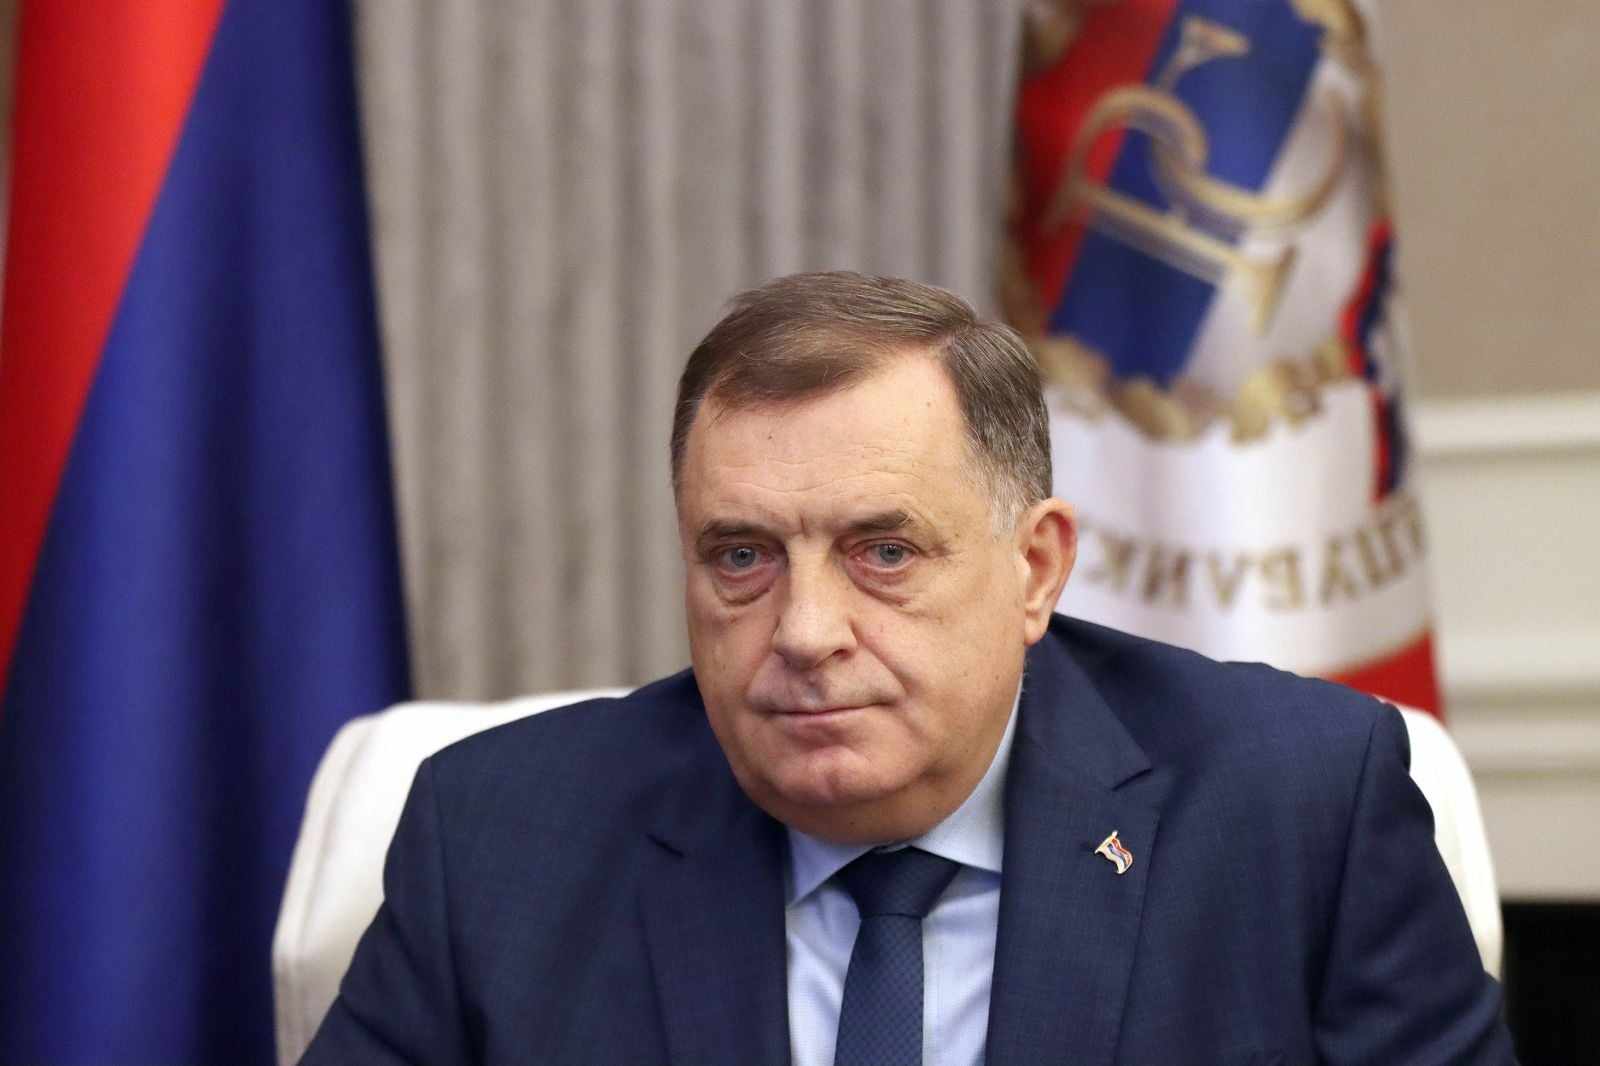 Dodik Says 10-15 Countries Support Secession For Republika Srpska